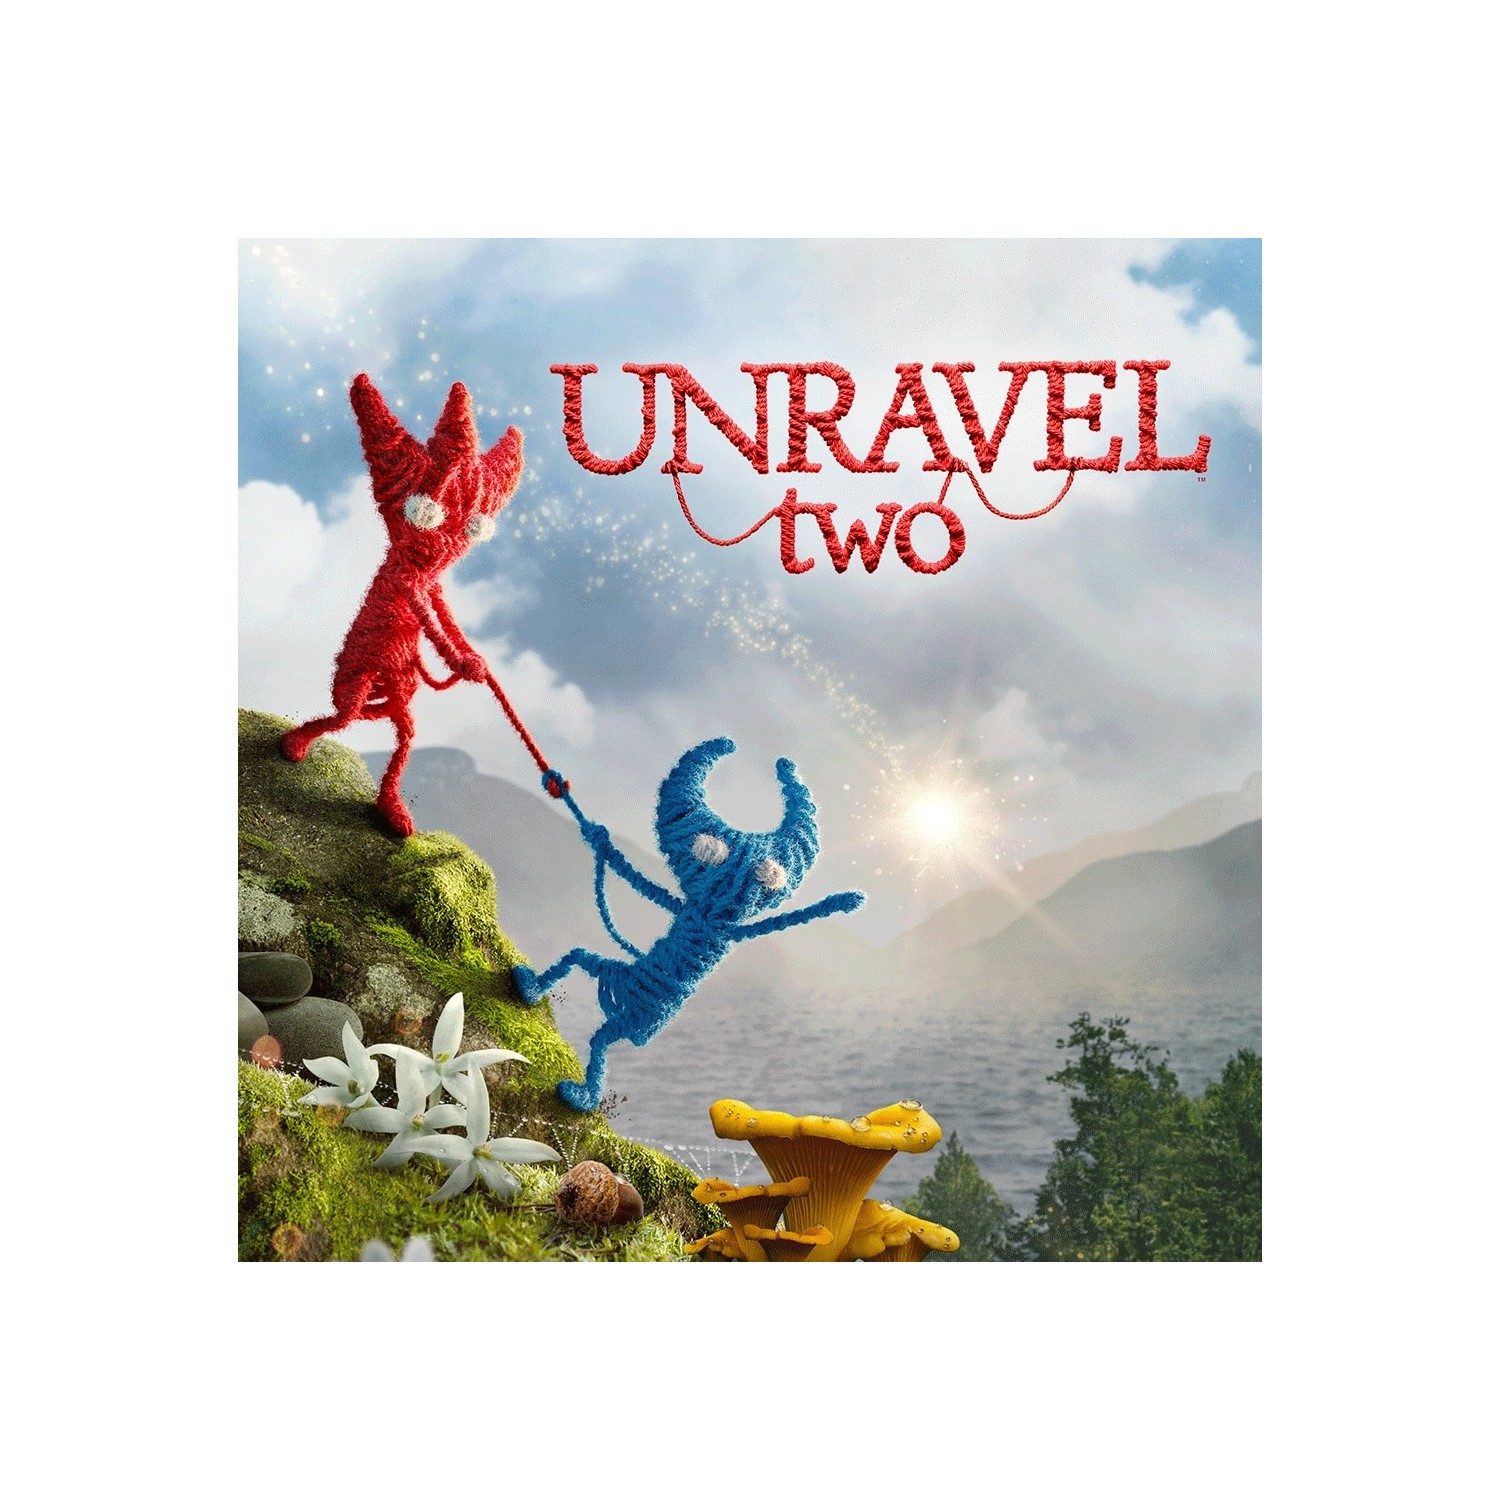 Unravel two русский язык. Unravel 2 управление. Unravel two. Unravel two рыба.